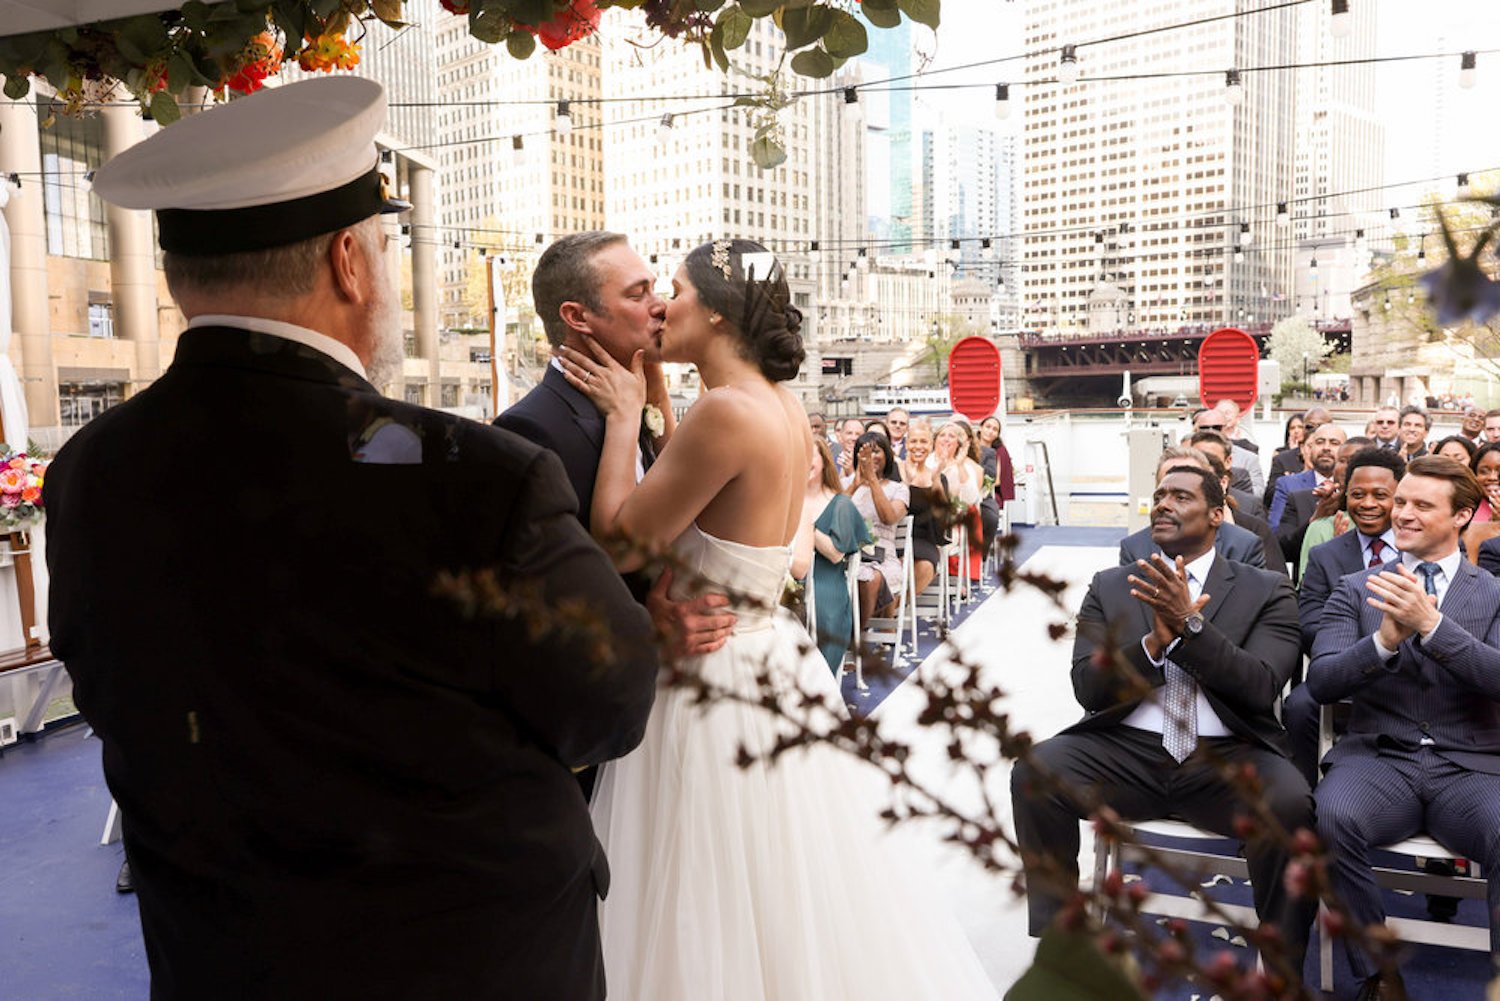 Kelly Severide and Stella Kidd getting married in 'Chicago Fire'